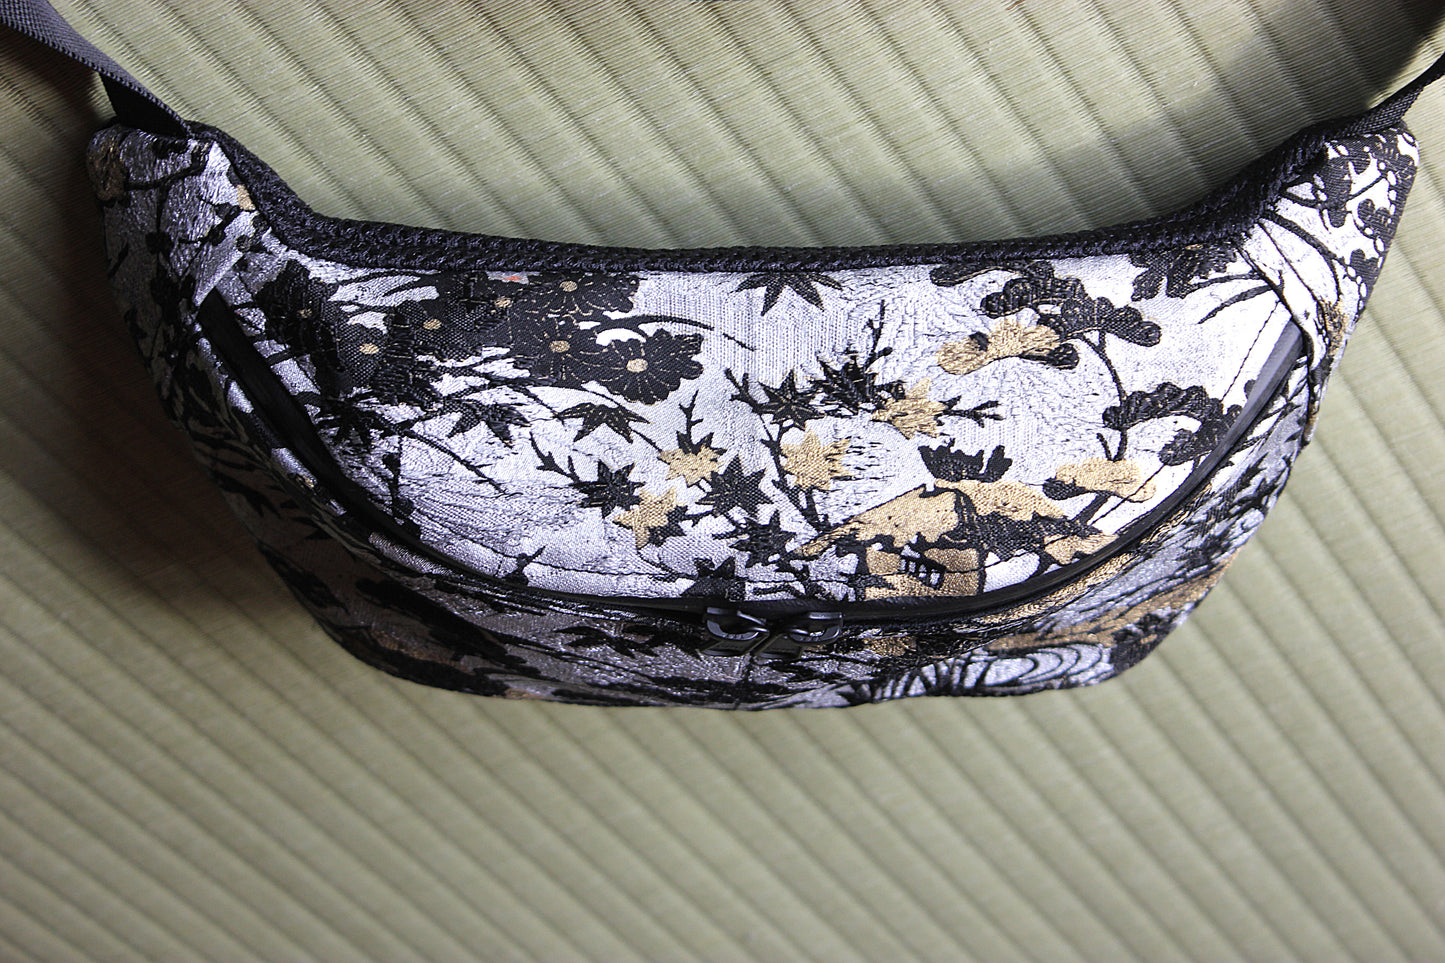 Southern japan landscape beautiful Japanese handcrafted bum bag made sustainably from antique kimono fabric